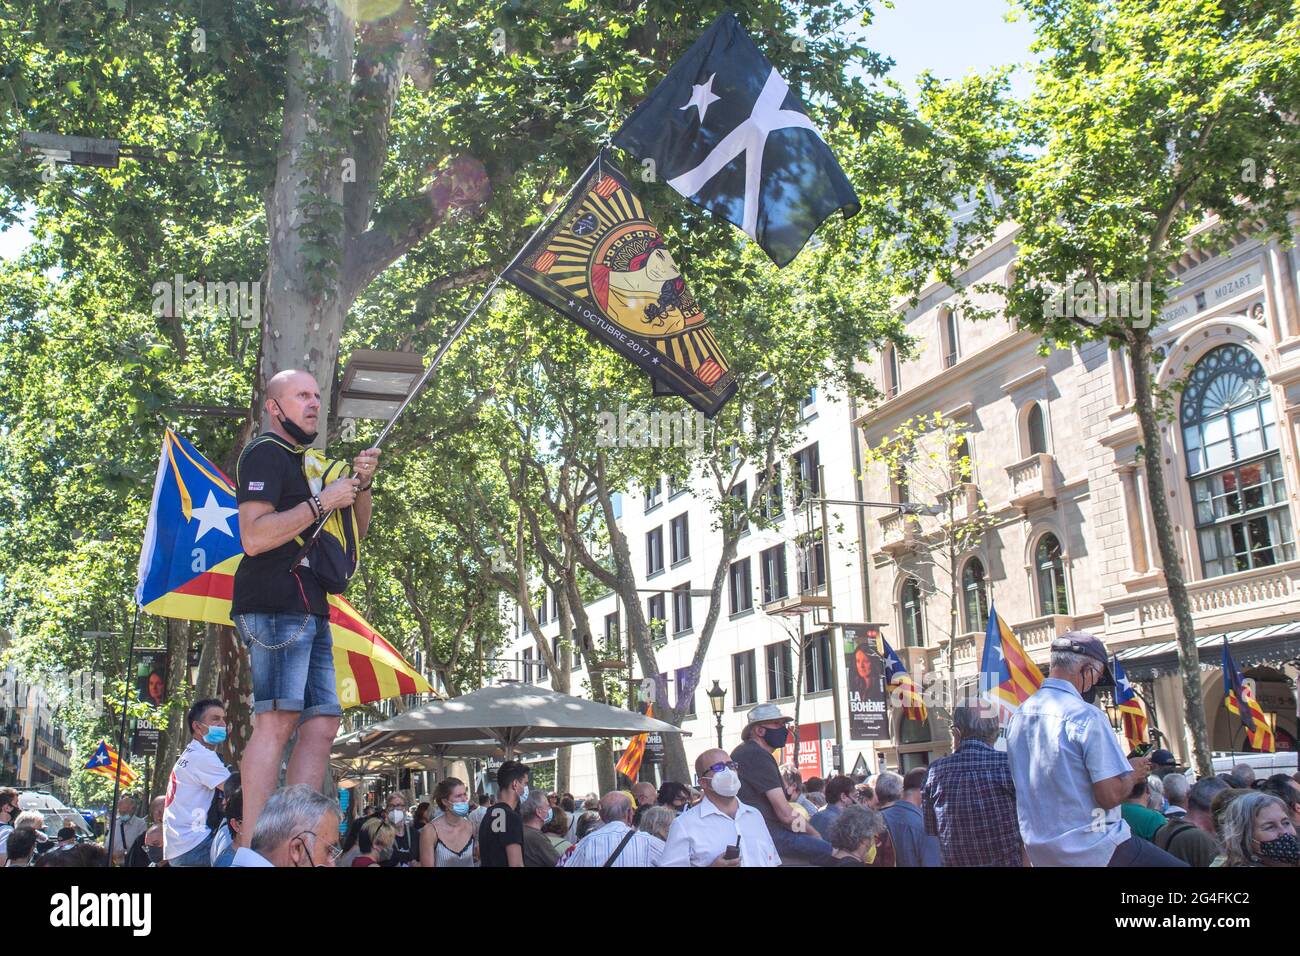 June 21, 2021, Barcelona, Catalonia, Spain: Protester is seen with Catalan independence flags.Hundreds of Catalan independentistas have demonstrated this Monday, June 21, in Las Ramblas in Barcelona, in front of the Gran Teatre del Liceu (Great Theater of the Lyceum), shielded by many policemen, to protest the visit of the President of the Spanish Government, Pedro Sanchez, who has held a conference entitled ''Reunion: a project for the future for all of Spain'', with the expectation of an imminent granting of pardons for the independence leaders in prison. The protesters protested to denounc Stock Photo